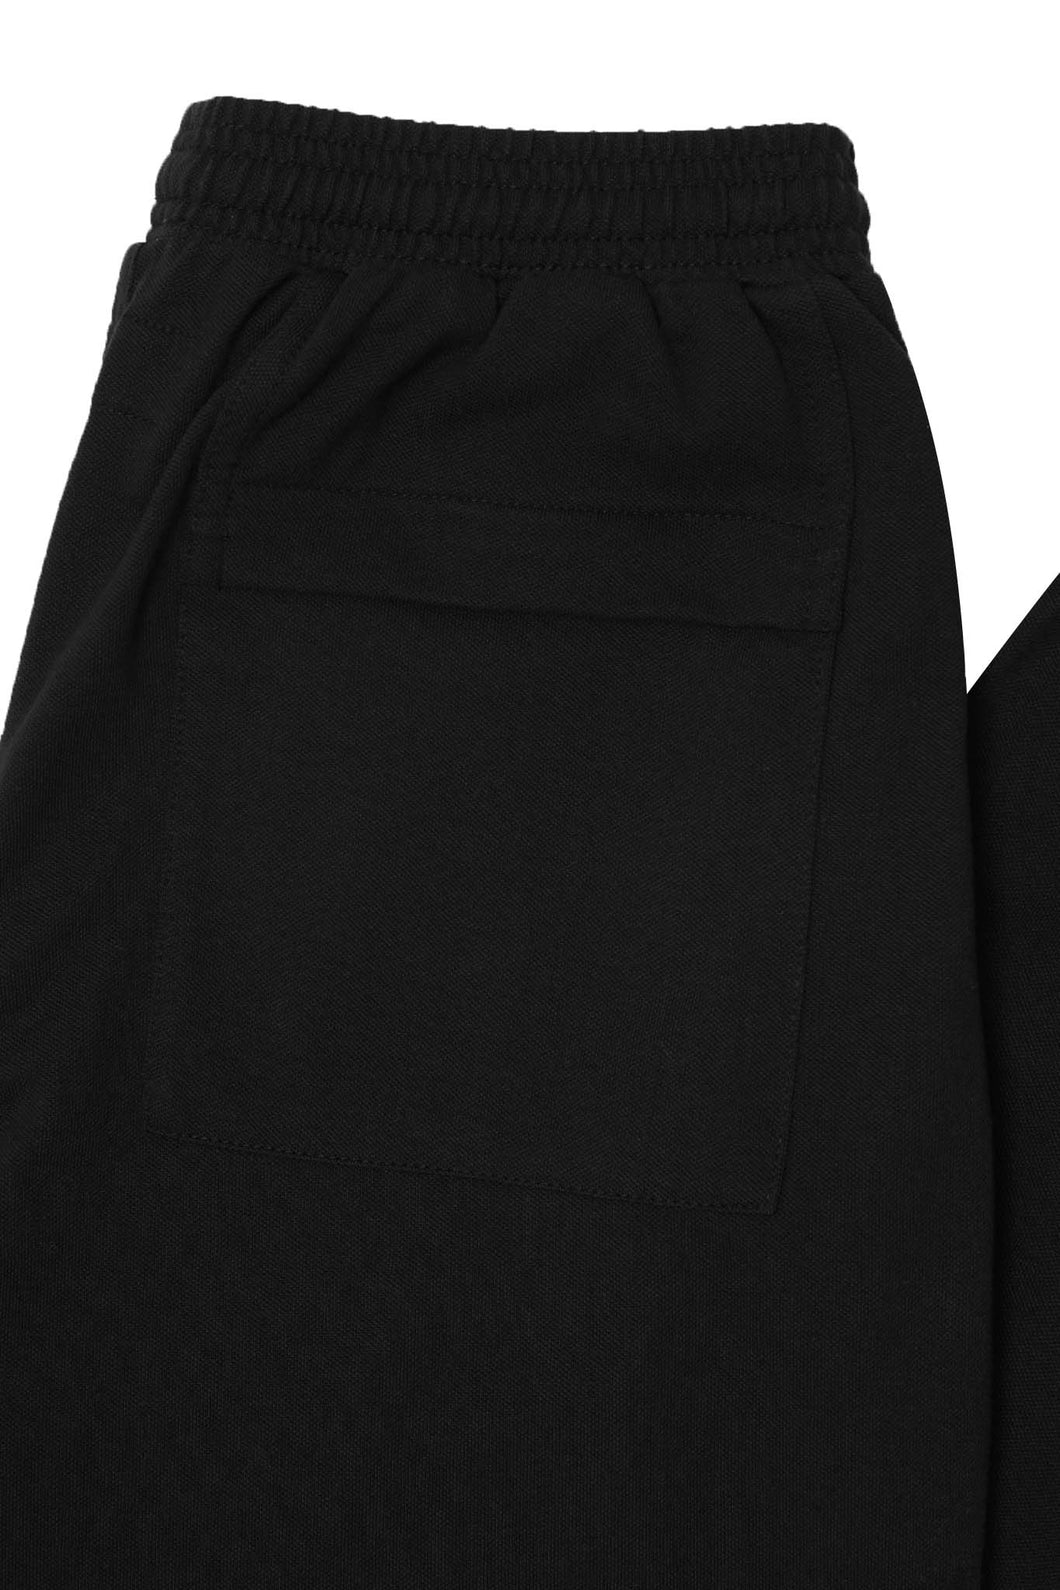 PIQUE ROGUE PANTS IN ANTHRACITE – MN+LA